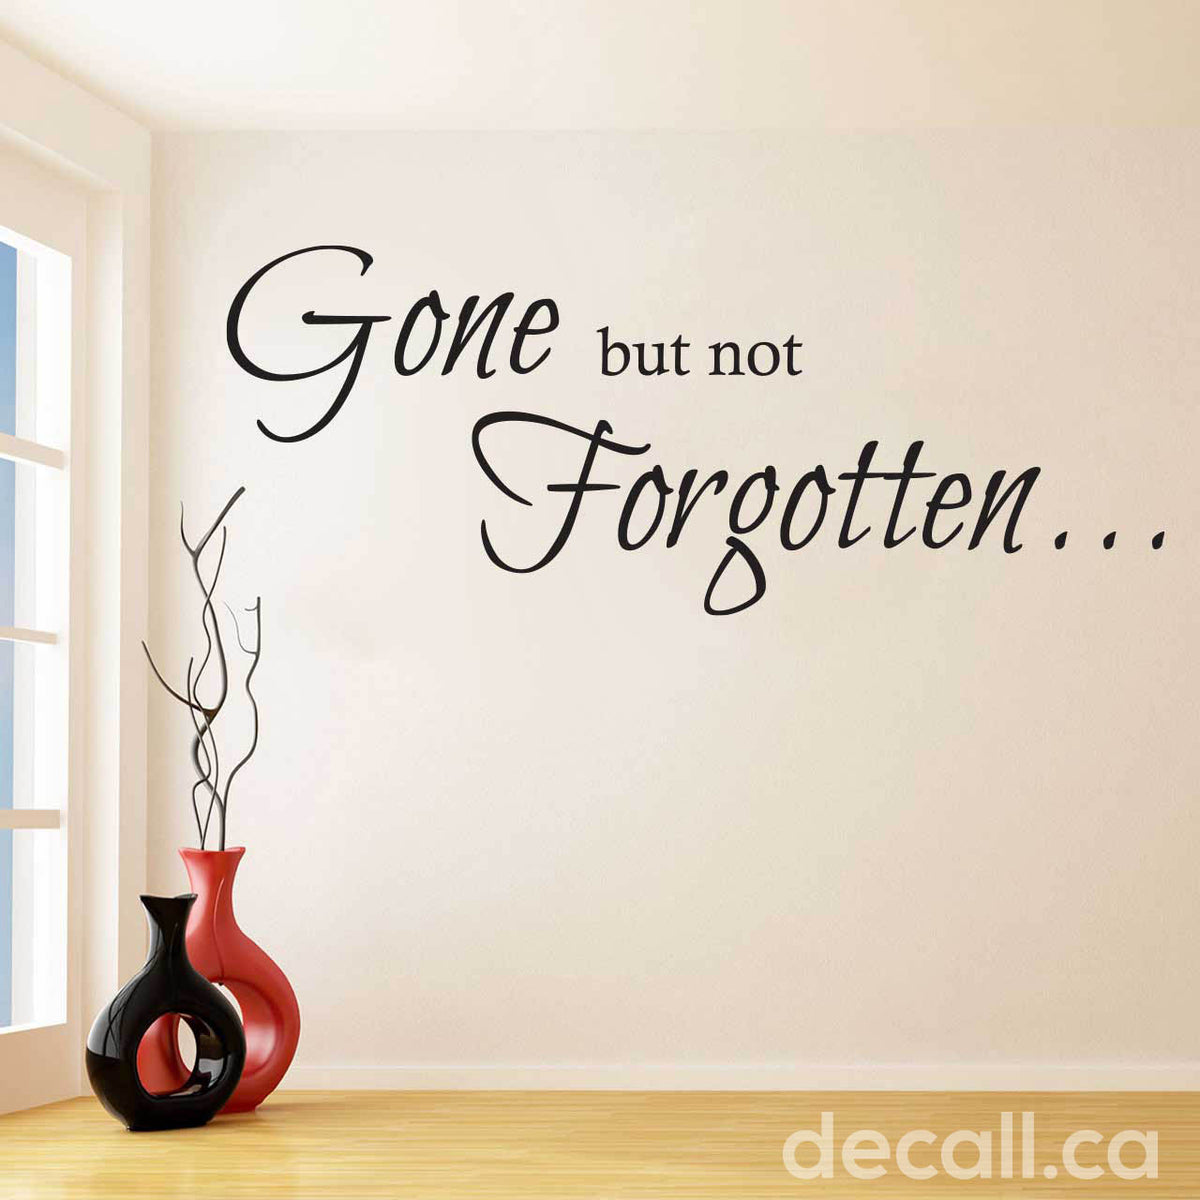 gone but not forgotten quotes sayings